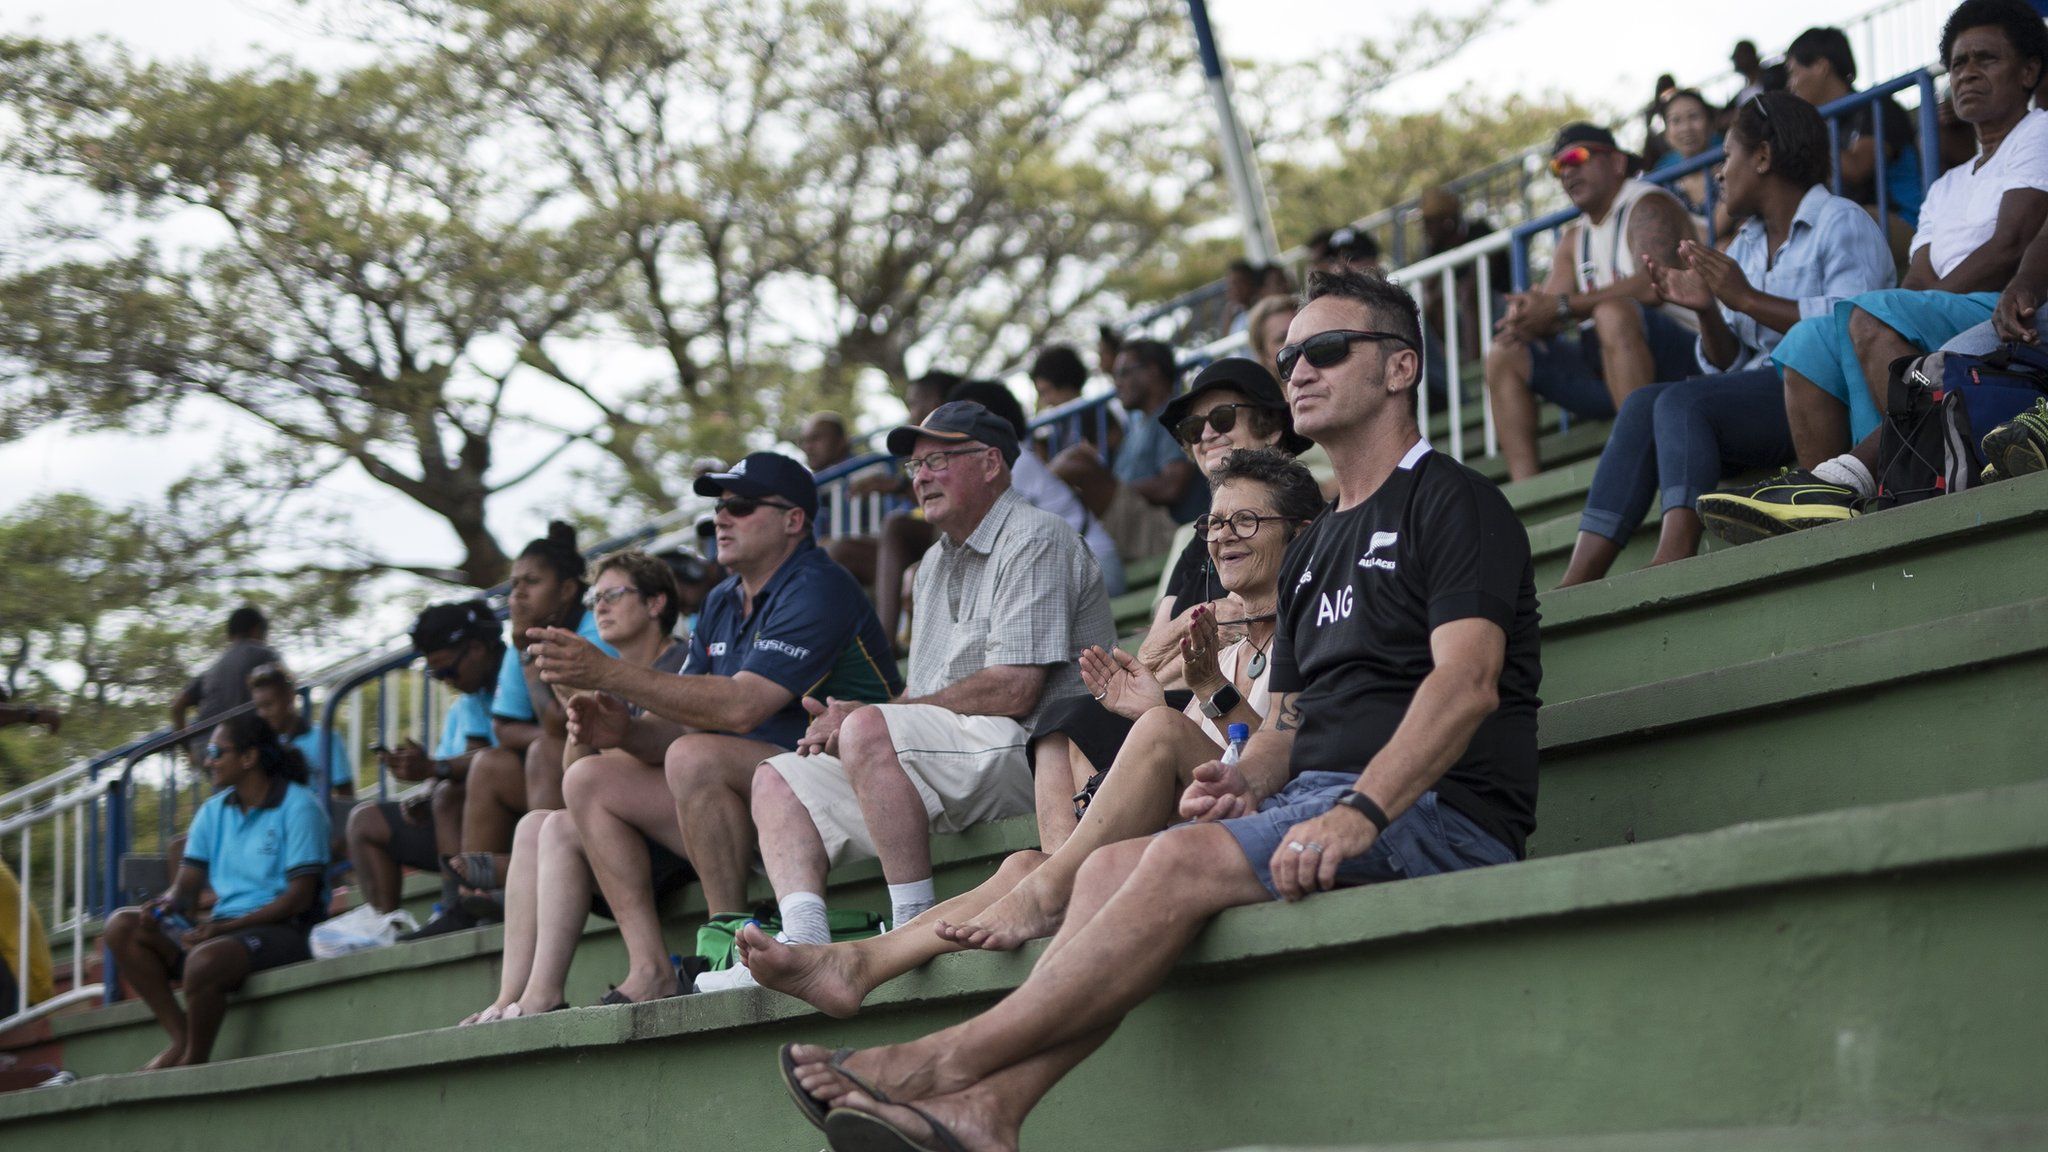 Fans at the Oceania Championship